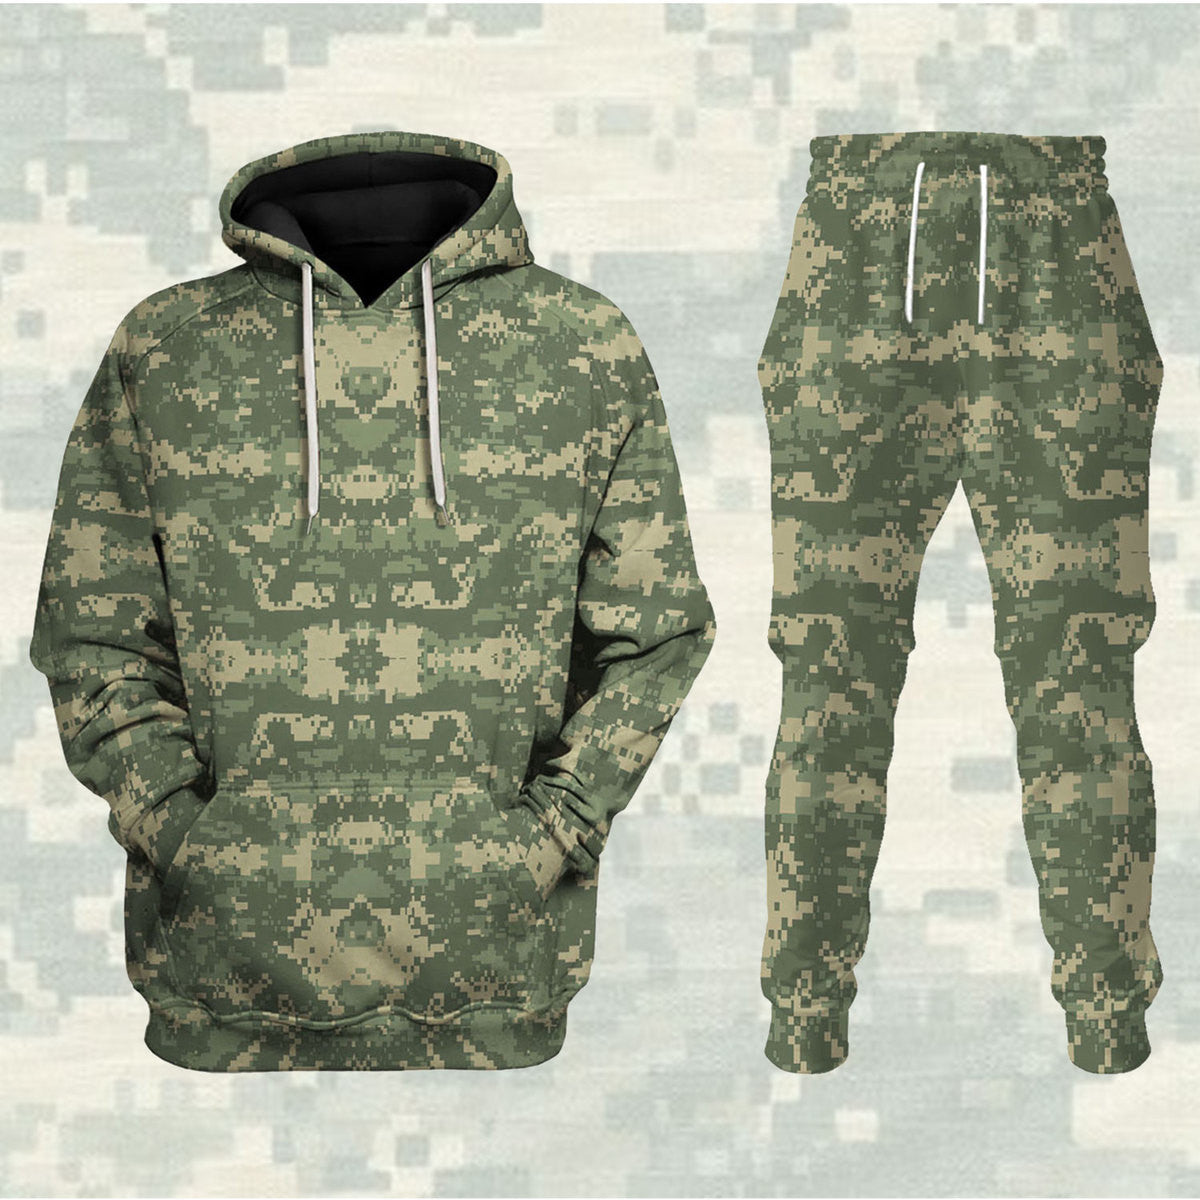 American ACU or Universal Camouflage Pattern (UCP) CAMO Track suit